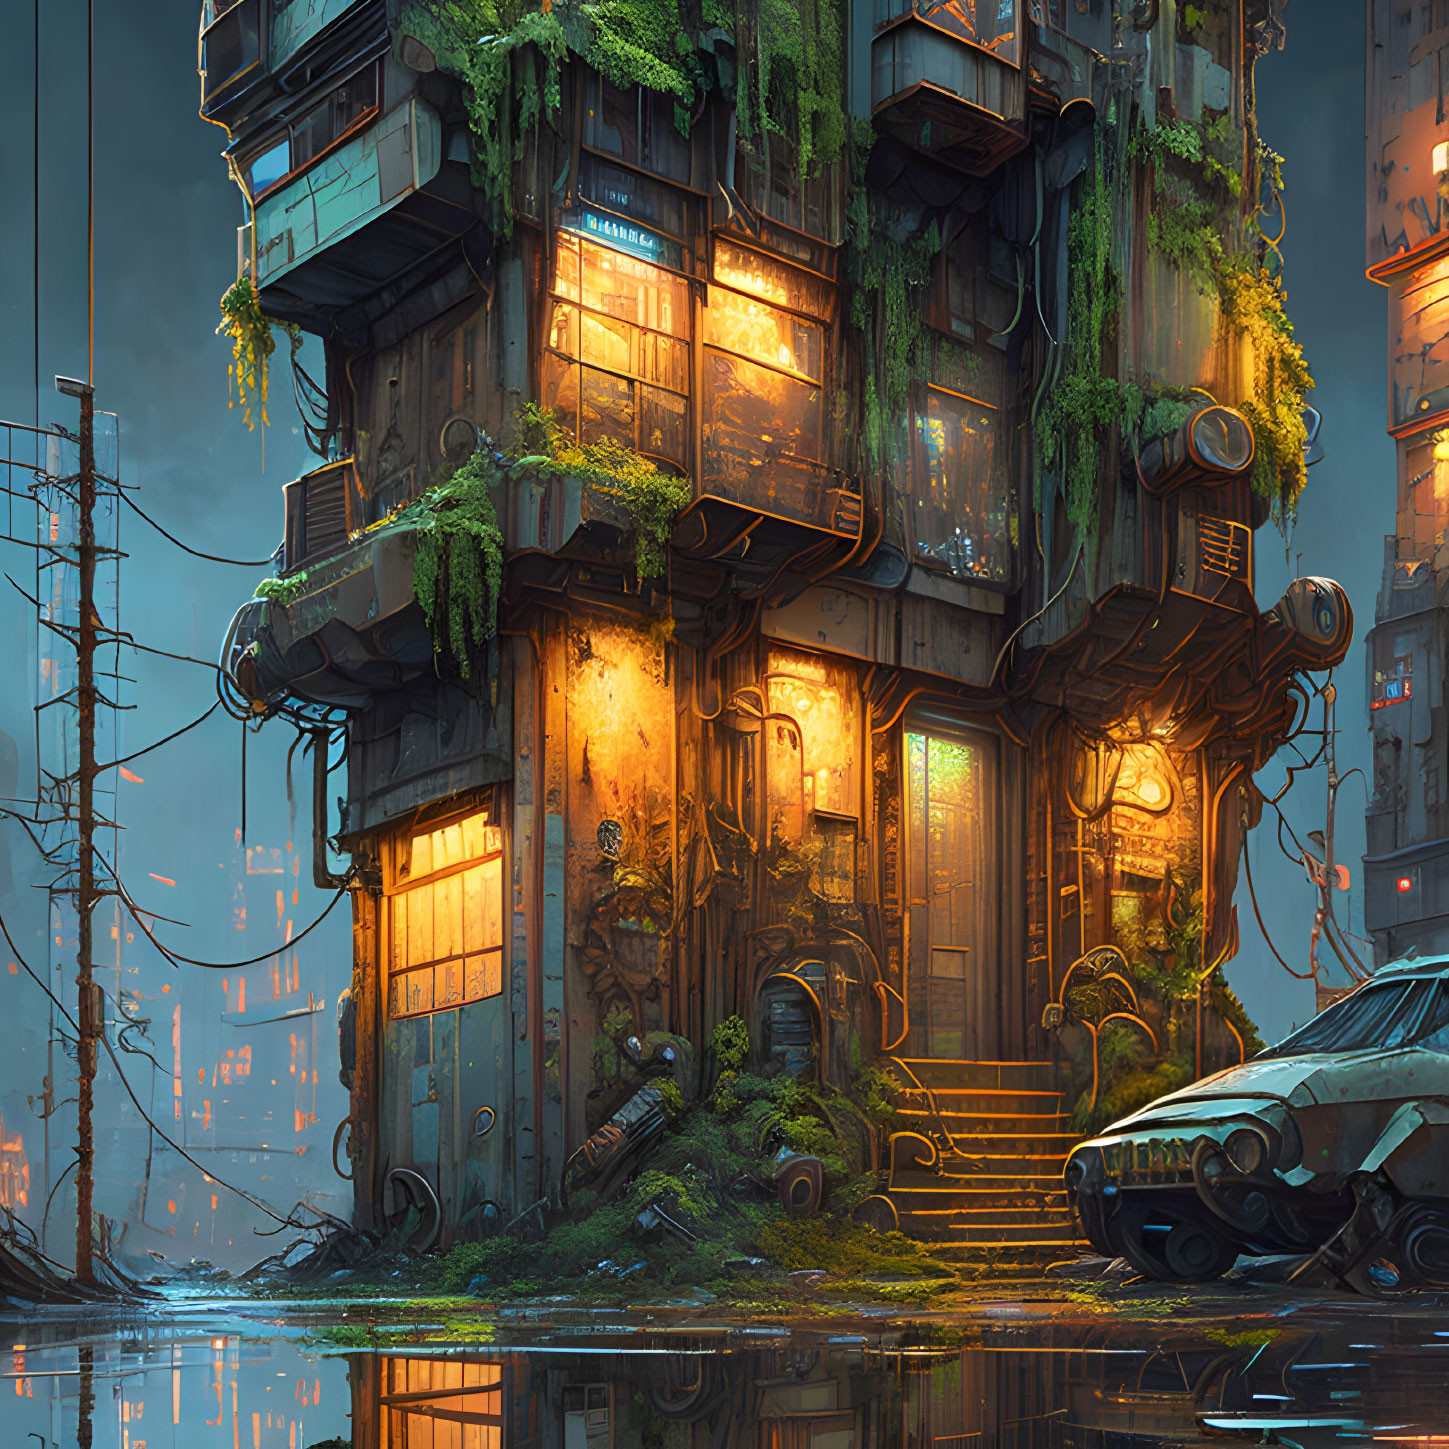 Dilapidated futuristic cityscape with overgrown plants, flooded street, and abandoned car